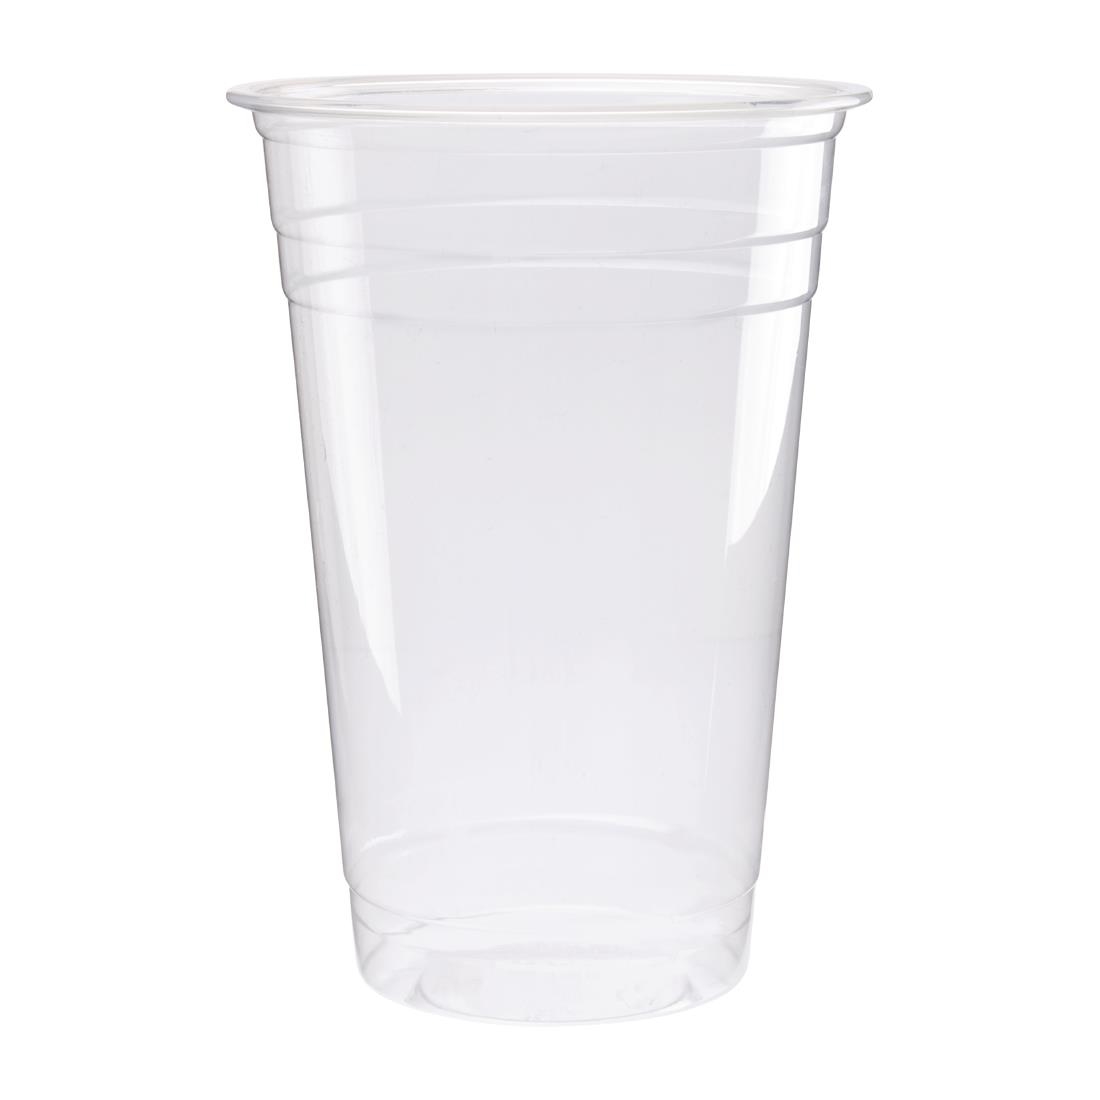 Fiesta Green Compostable PLA Cold Cups 568ml / 20oz (Pack of 1000)